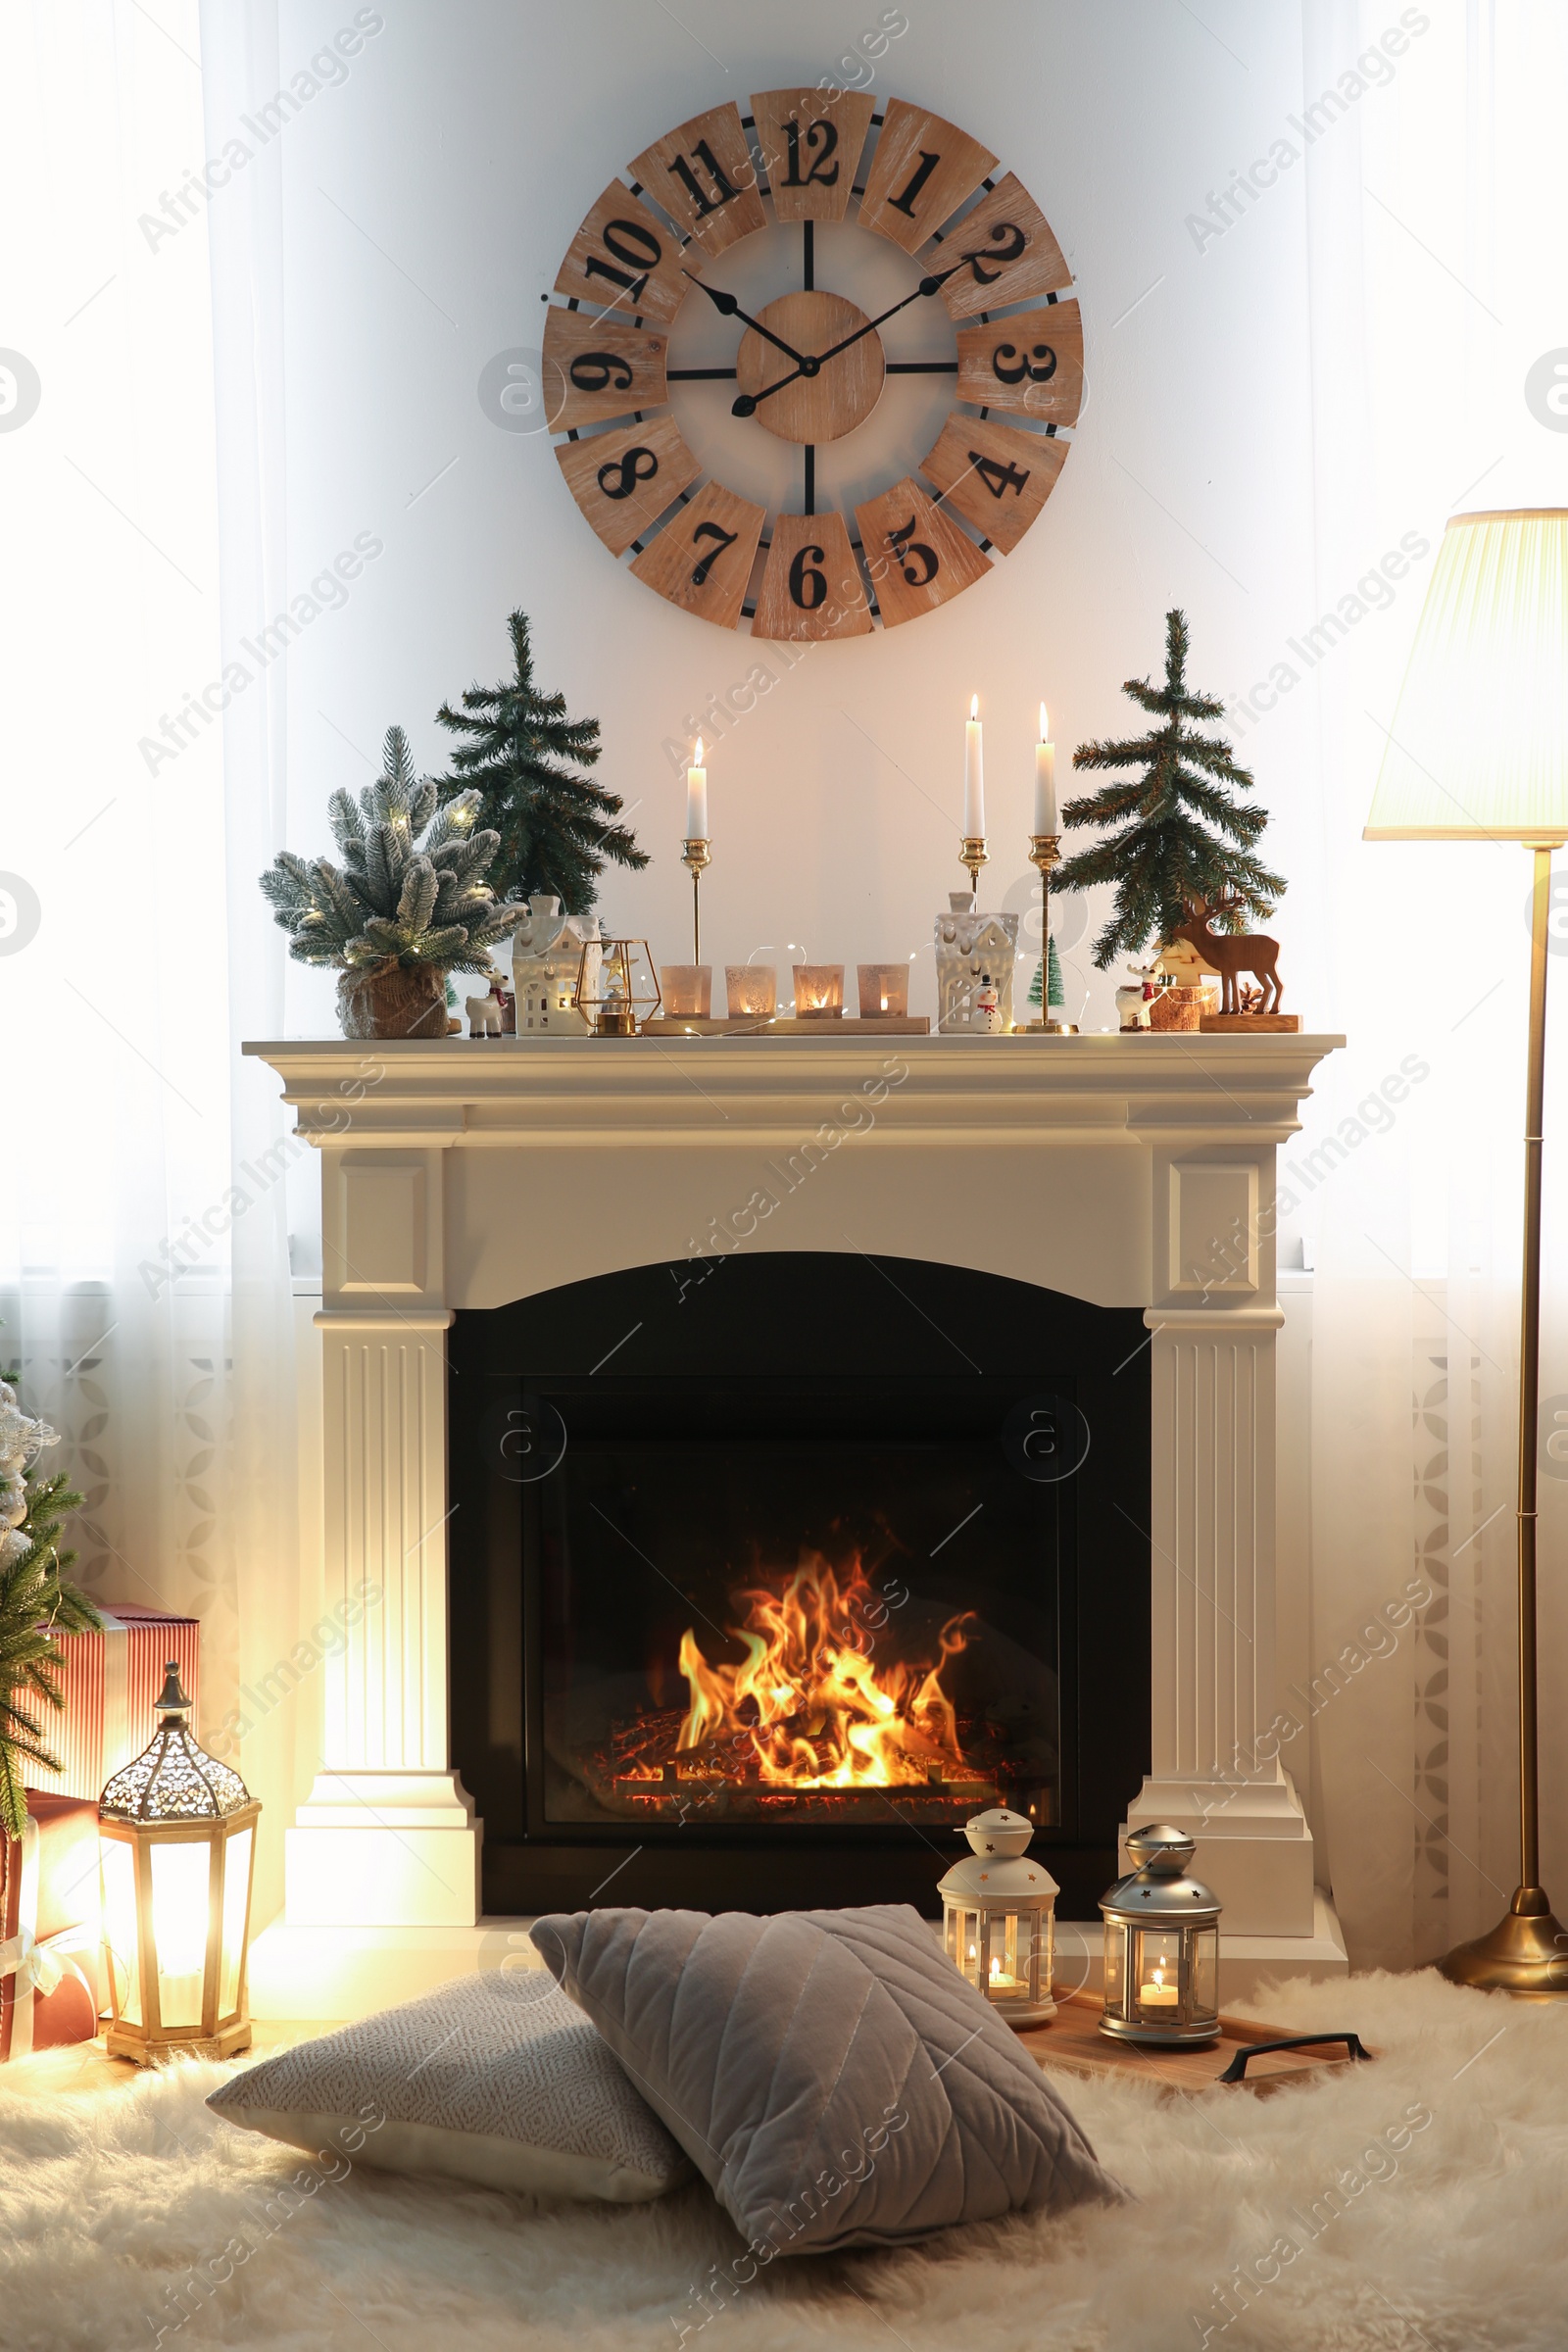 Photo of Small fir trees and candles on mantelpiece indoors. Christmas interior design